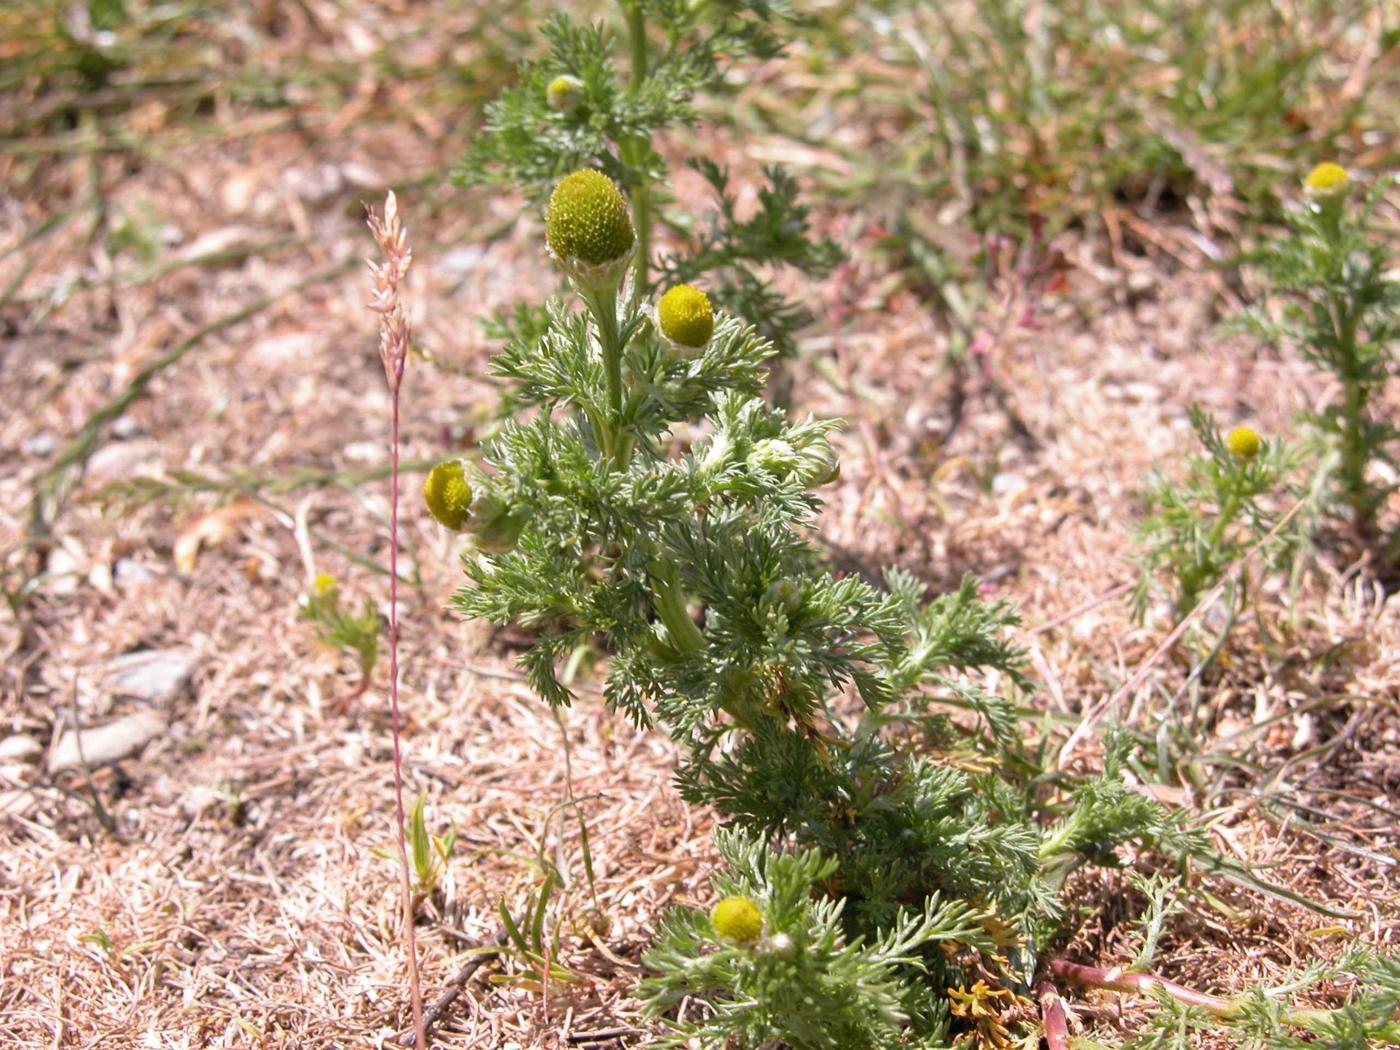 Mayweed, Rayless, Pineapple weed plant